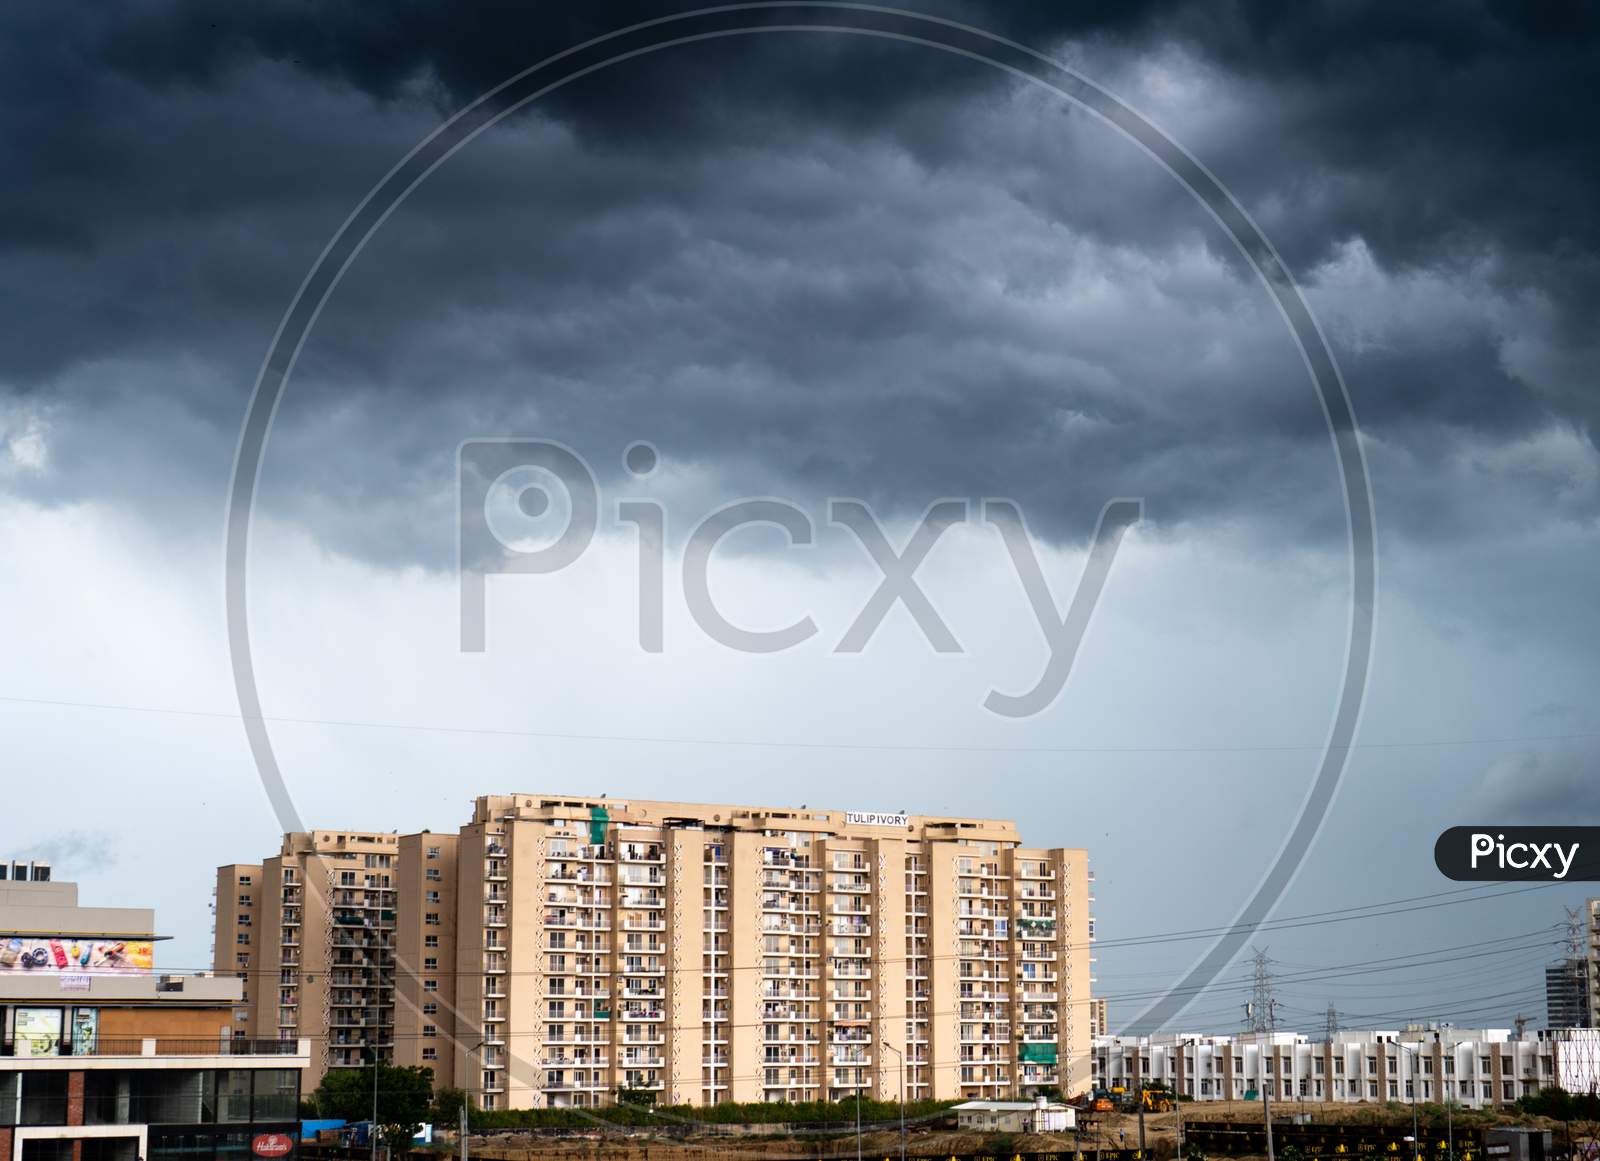 Gurgaon Delhi Cityscape With Monsoon Clouds Casting Shadows On High Rise Apartments And Buildings Showing Passage Of Time And Rapid Growth Of Real Estate And Infrastructure